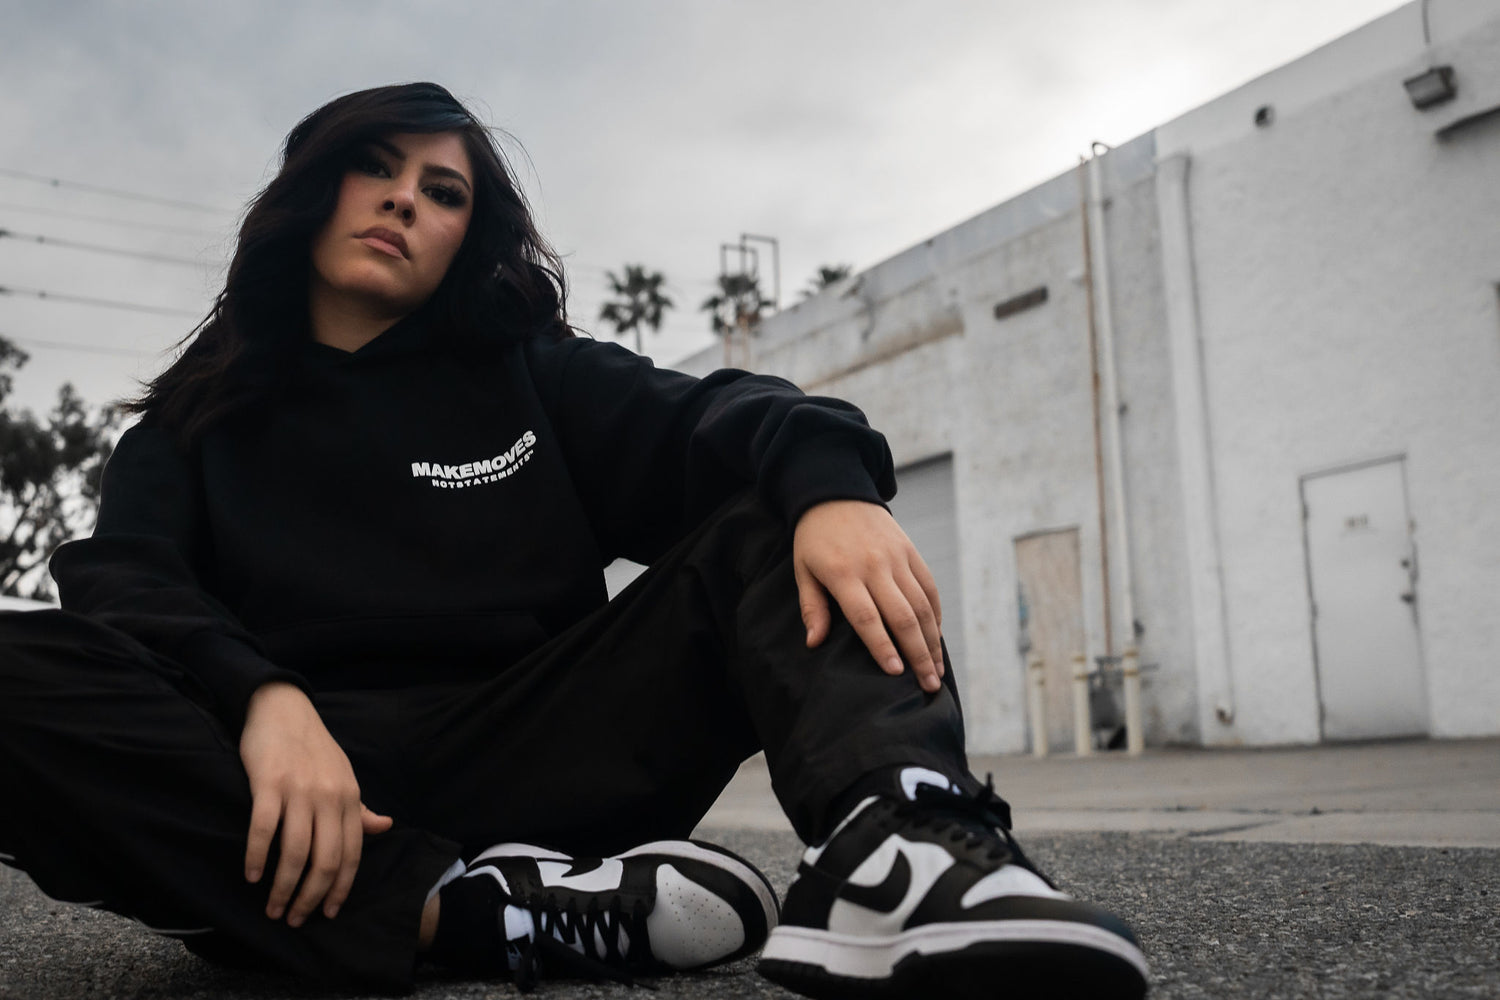 Make Moves Not Statements Luxury LA Hoodie is worn by urban fashion woman styled with Nike and joggers.